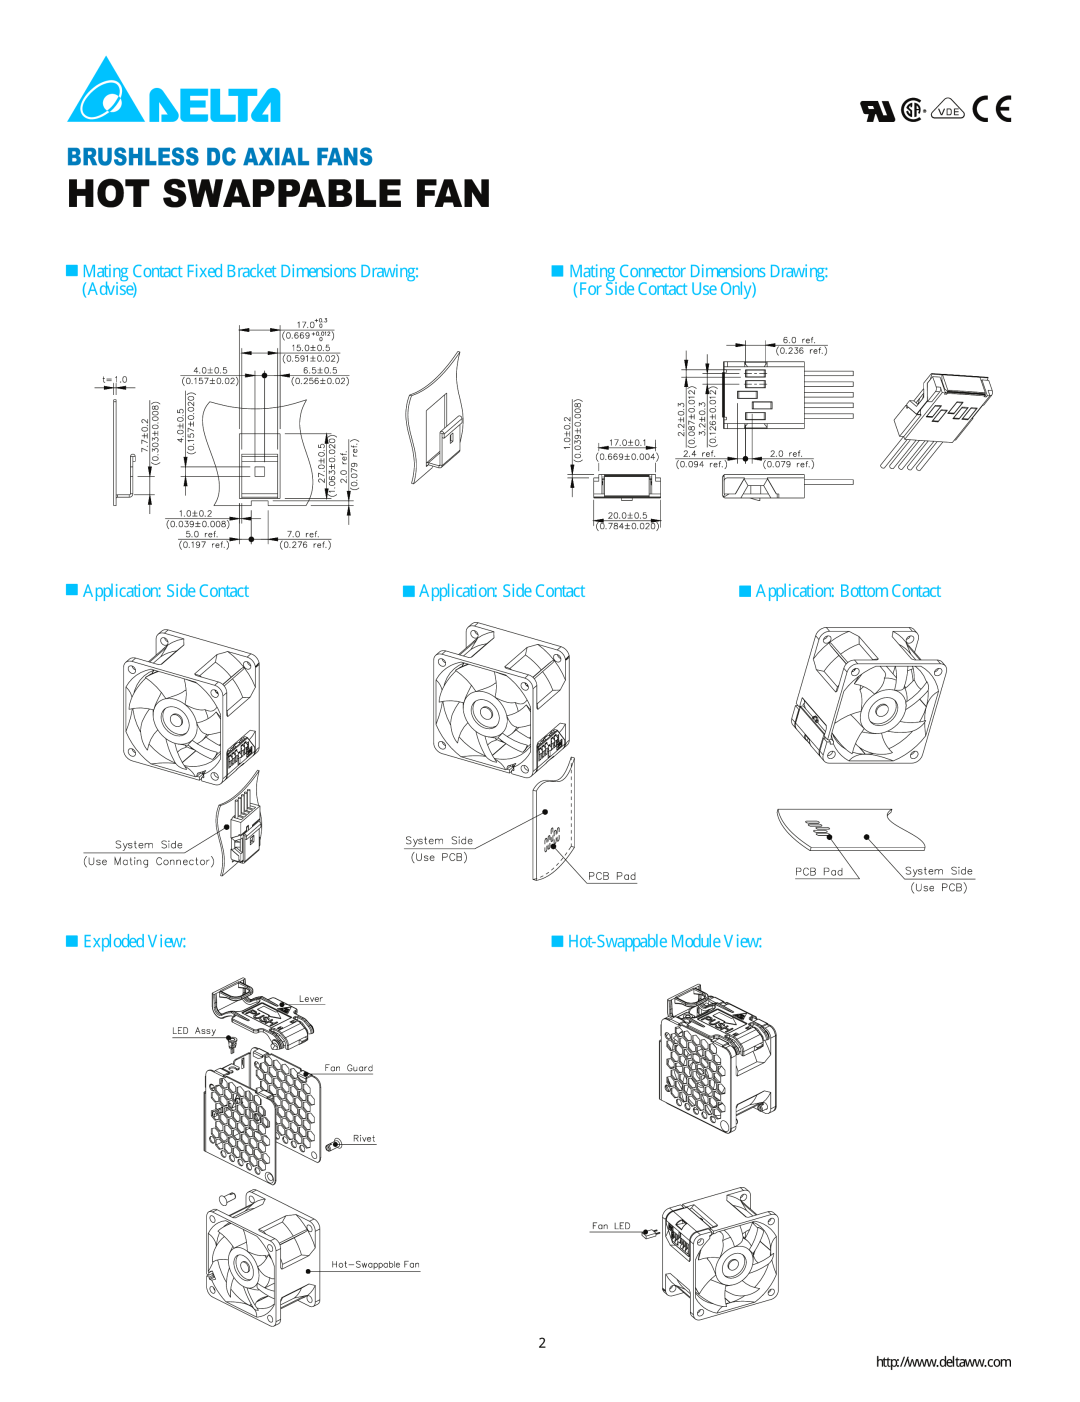 Delta Electronics DC Axial Fans manual Advise, For Side Contact Use Only, Application Side Contact, Exploded View 